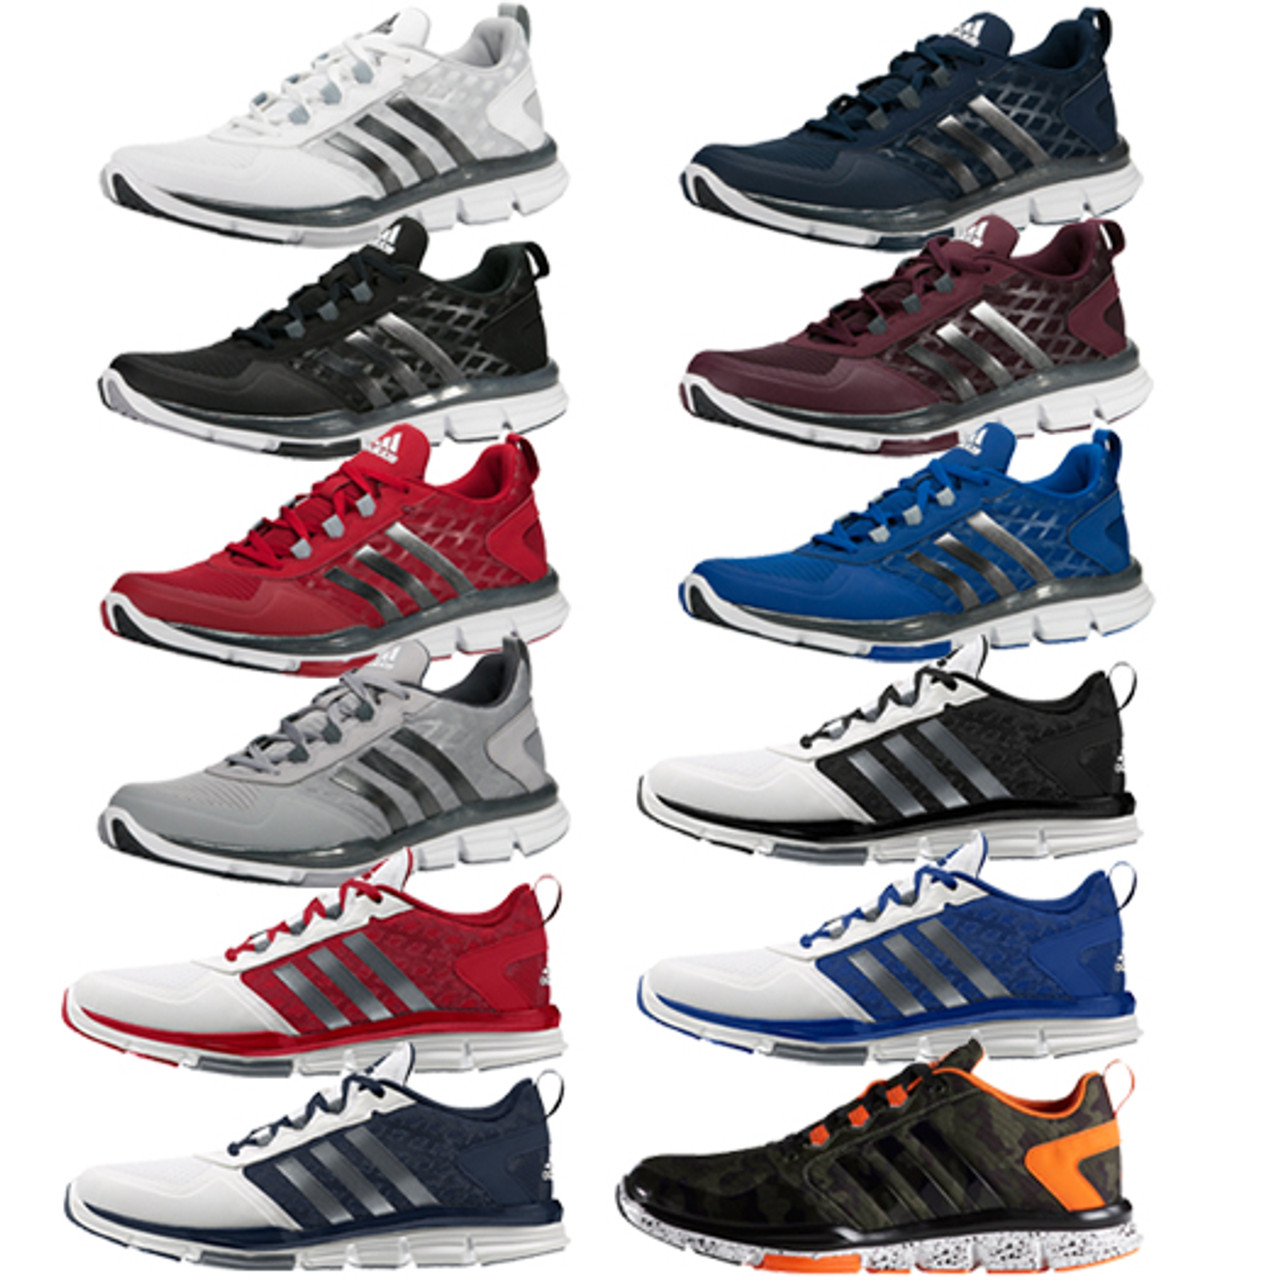 Adidas Speed Trainer 2 - Bases Loaded